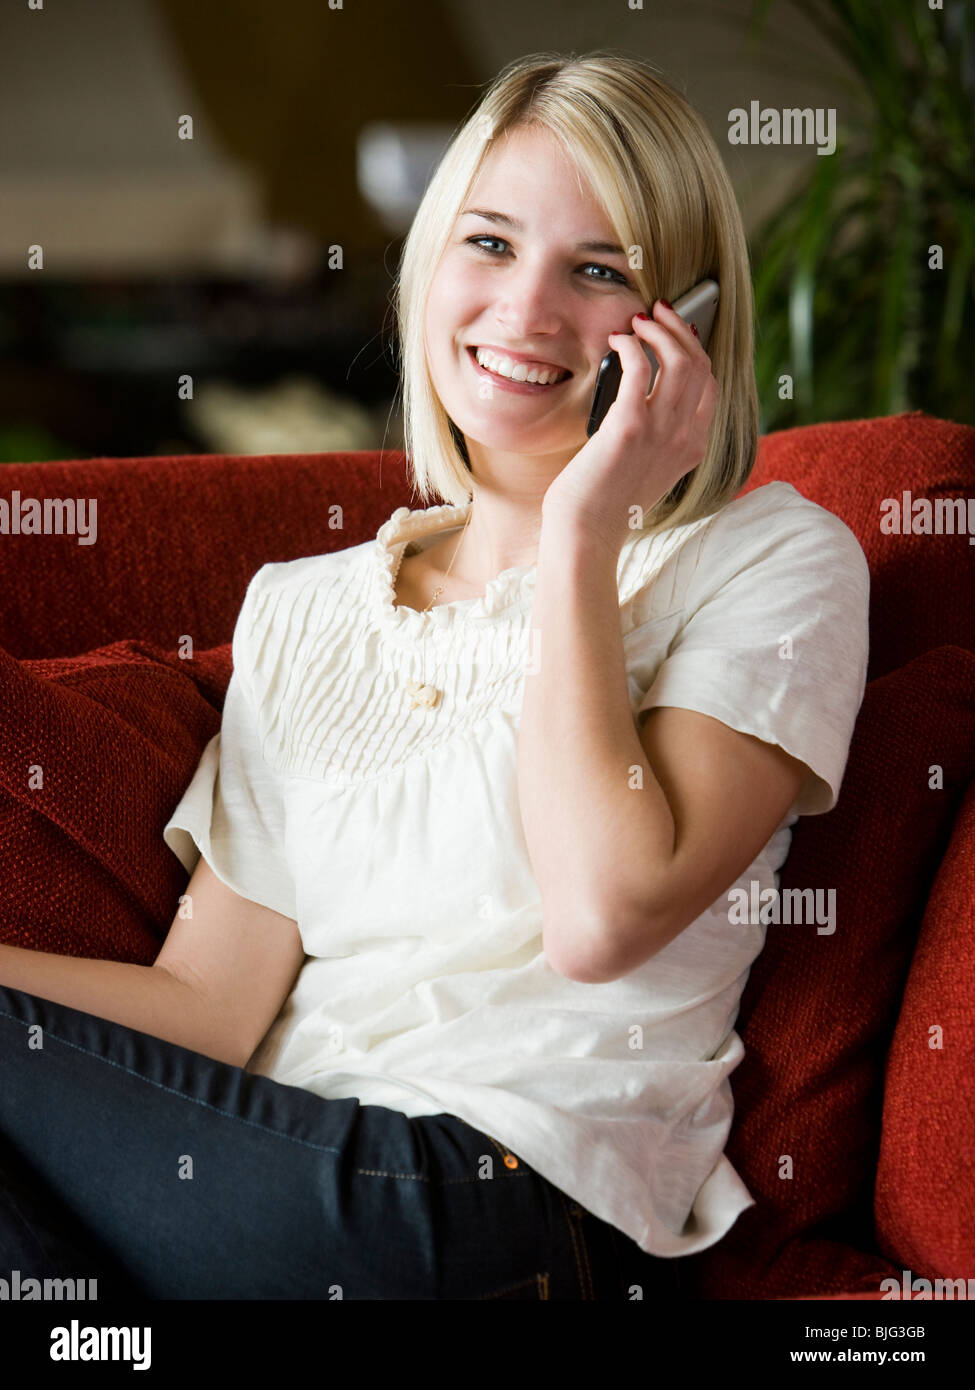 woman using her cell phone on a red sofa Stock Photo